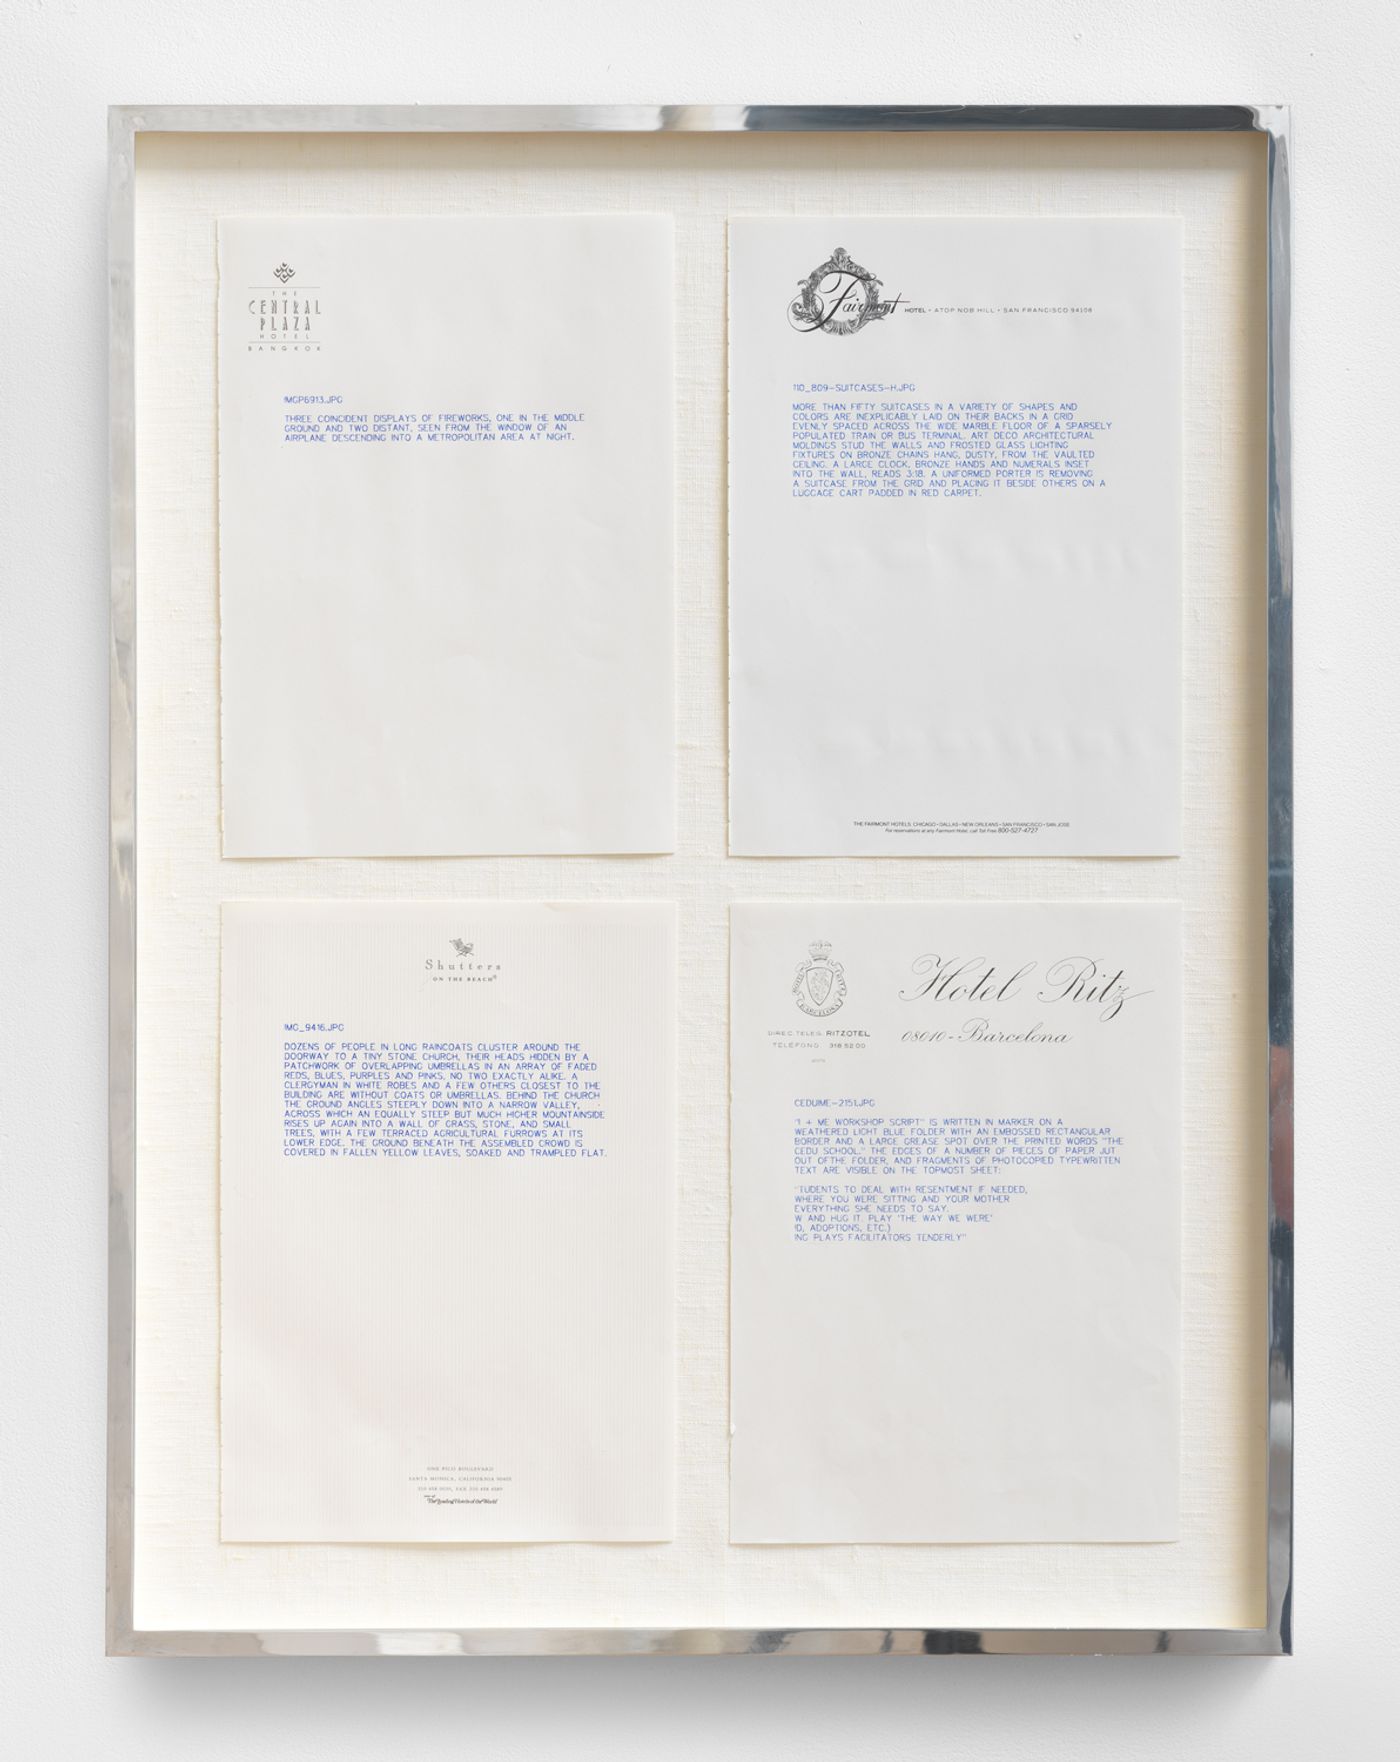 Kevin Zucker, No Hotel, 2014. Ballpoint pen on pages from Martin Kippenberger's No Drawing No Cry 4 drawings, each 8.3 x 11.7 in, Framed: 28.5 x 21.5 in (72.4 x 54.6 cm).